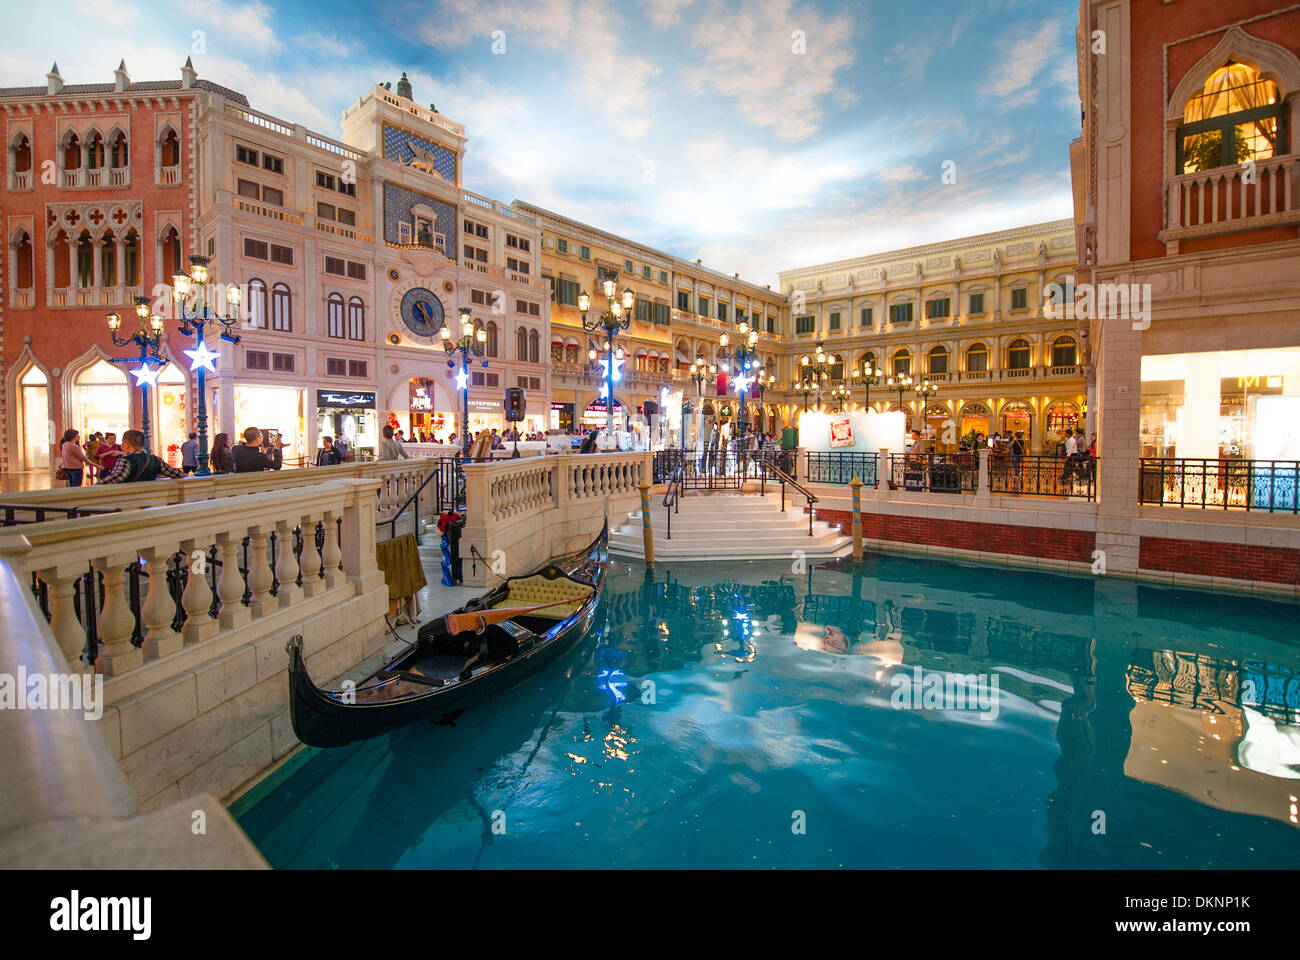 St Mark's Square of The Venetian Macao's shopping mall with Canal Grande, gondola and Venice style shops, Macau, China Stock Photo